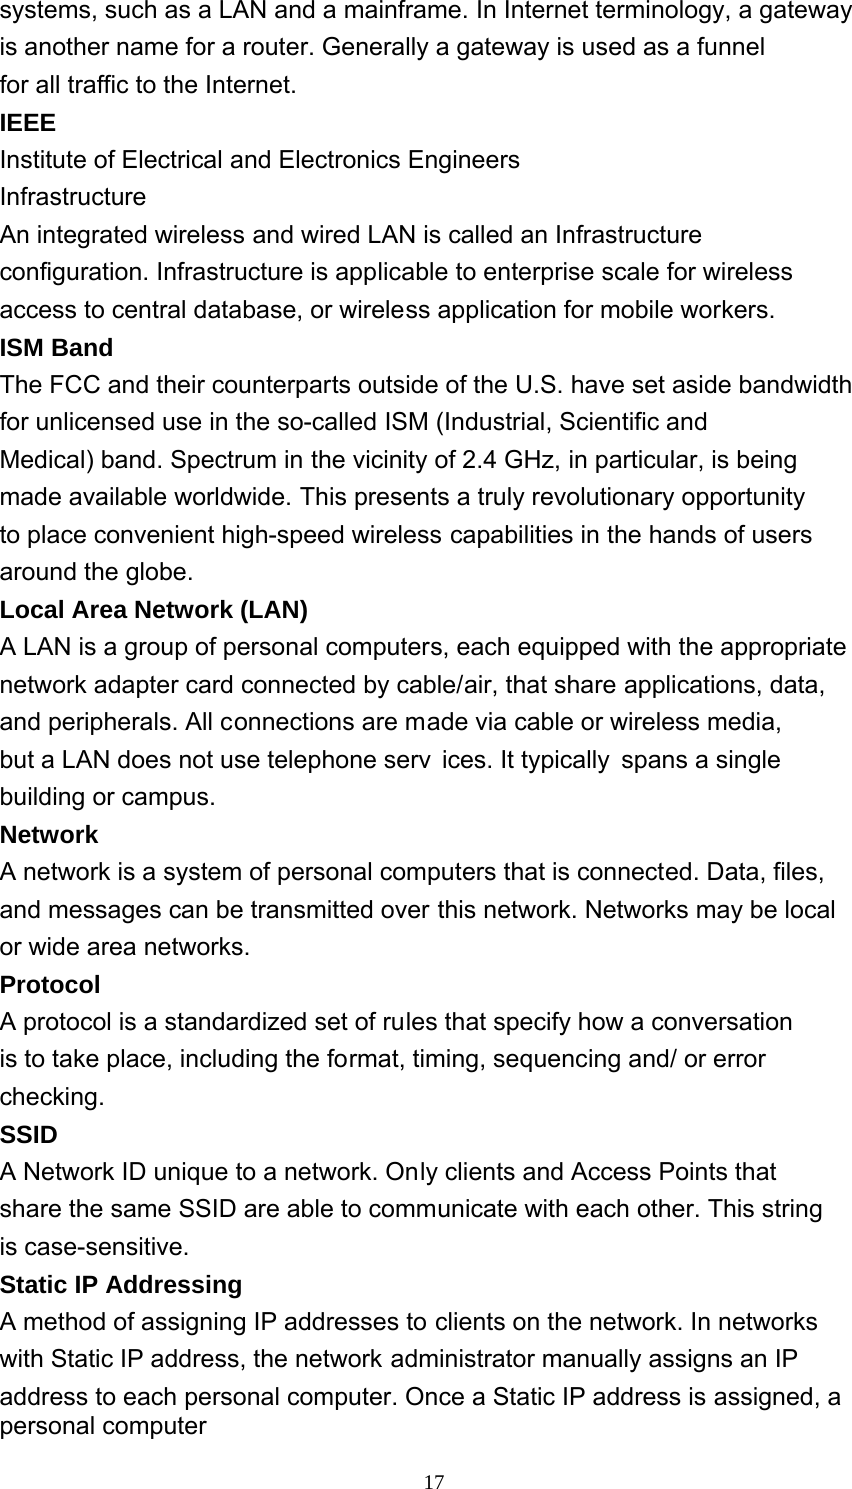 17  systems, such as a LAN and a mainframe. In Internet terminology, a gateway is another name for a router. Generally a gateway is used as a funnel for all traffic to the Internet. IEEE Institute of Electrical and Electronics Engineers Infrastructure An integrated wireless and wired LAN is called an Infrastructure configuration. Infrastructure is applicable to enterprise scale for wireless access to central database, or wireless application for mobile workers. ISM Band The FCC and their counterparts outside of the U.S. have set aside bandwidth for unlicensed use in the so-called ISM (Industrial, Scientific and Medical) band. Spectrum in the vicinity of 2.4 GHz, in particular, is being made available worldwide. This presents a truly revolutionary opportunity to place convenient high-speed wireless capabilities in the hands of users around the globe. Local Area Network (LAN) A LAN is a group of personal computers, each equipped with the appropriate network adapter card connected by cable/air, that share applications, data, and peripherals. All connections are made via cable or wireless media, but a LAN does not use telephone serv ices. It typically  spans a single building or campus. Network A network is a system of personal computers that is connected. Data, files, and messages can be transmitted over this network. Networks may be local or wide area networks. Protocol A protocol is a standardized set of rules that specify how a conversation is to take place, including the format, timing, sequencing and/ or error checking. SSID A Network ID unique to a network. Only clients and Access Points that share the same SSID are able to communicate with each other. This string is case-sensitive. Static IP Addressing A method of assigning IP addresses to clients on the network. In networks with Static IP address, the network administrator manually assigns an IP address to each personal computer. Once a Static IP address is assigned, a personal computer 